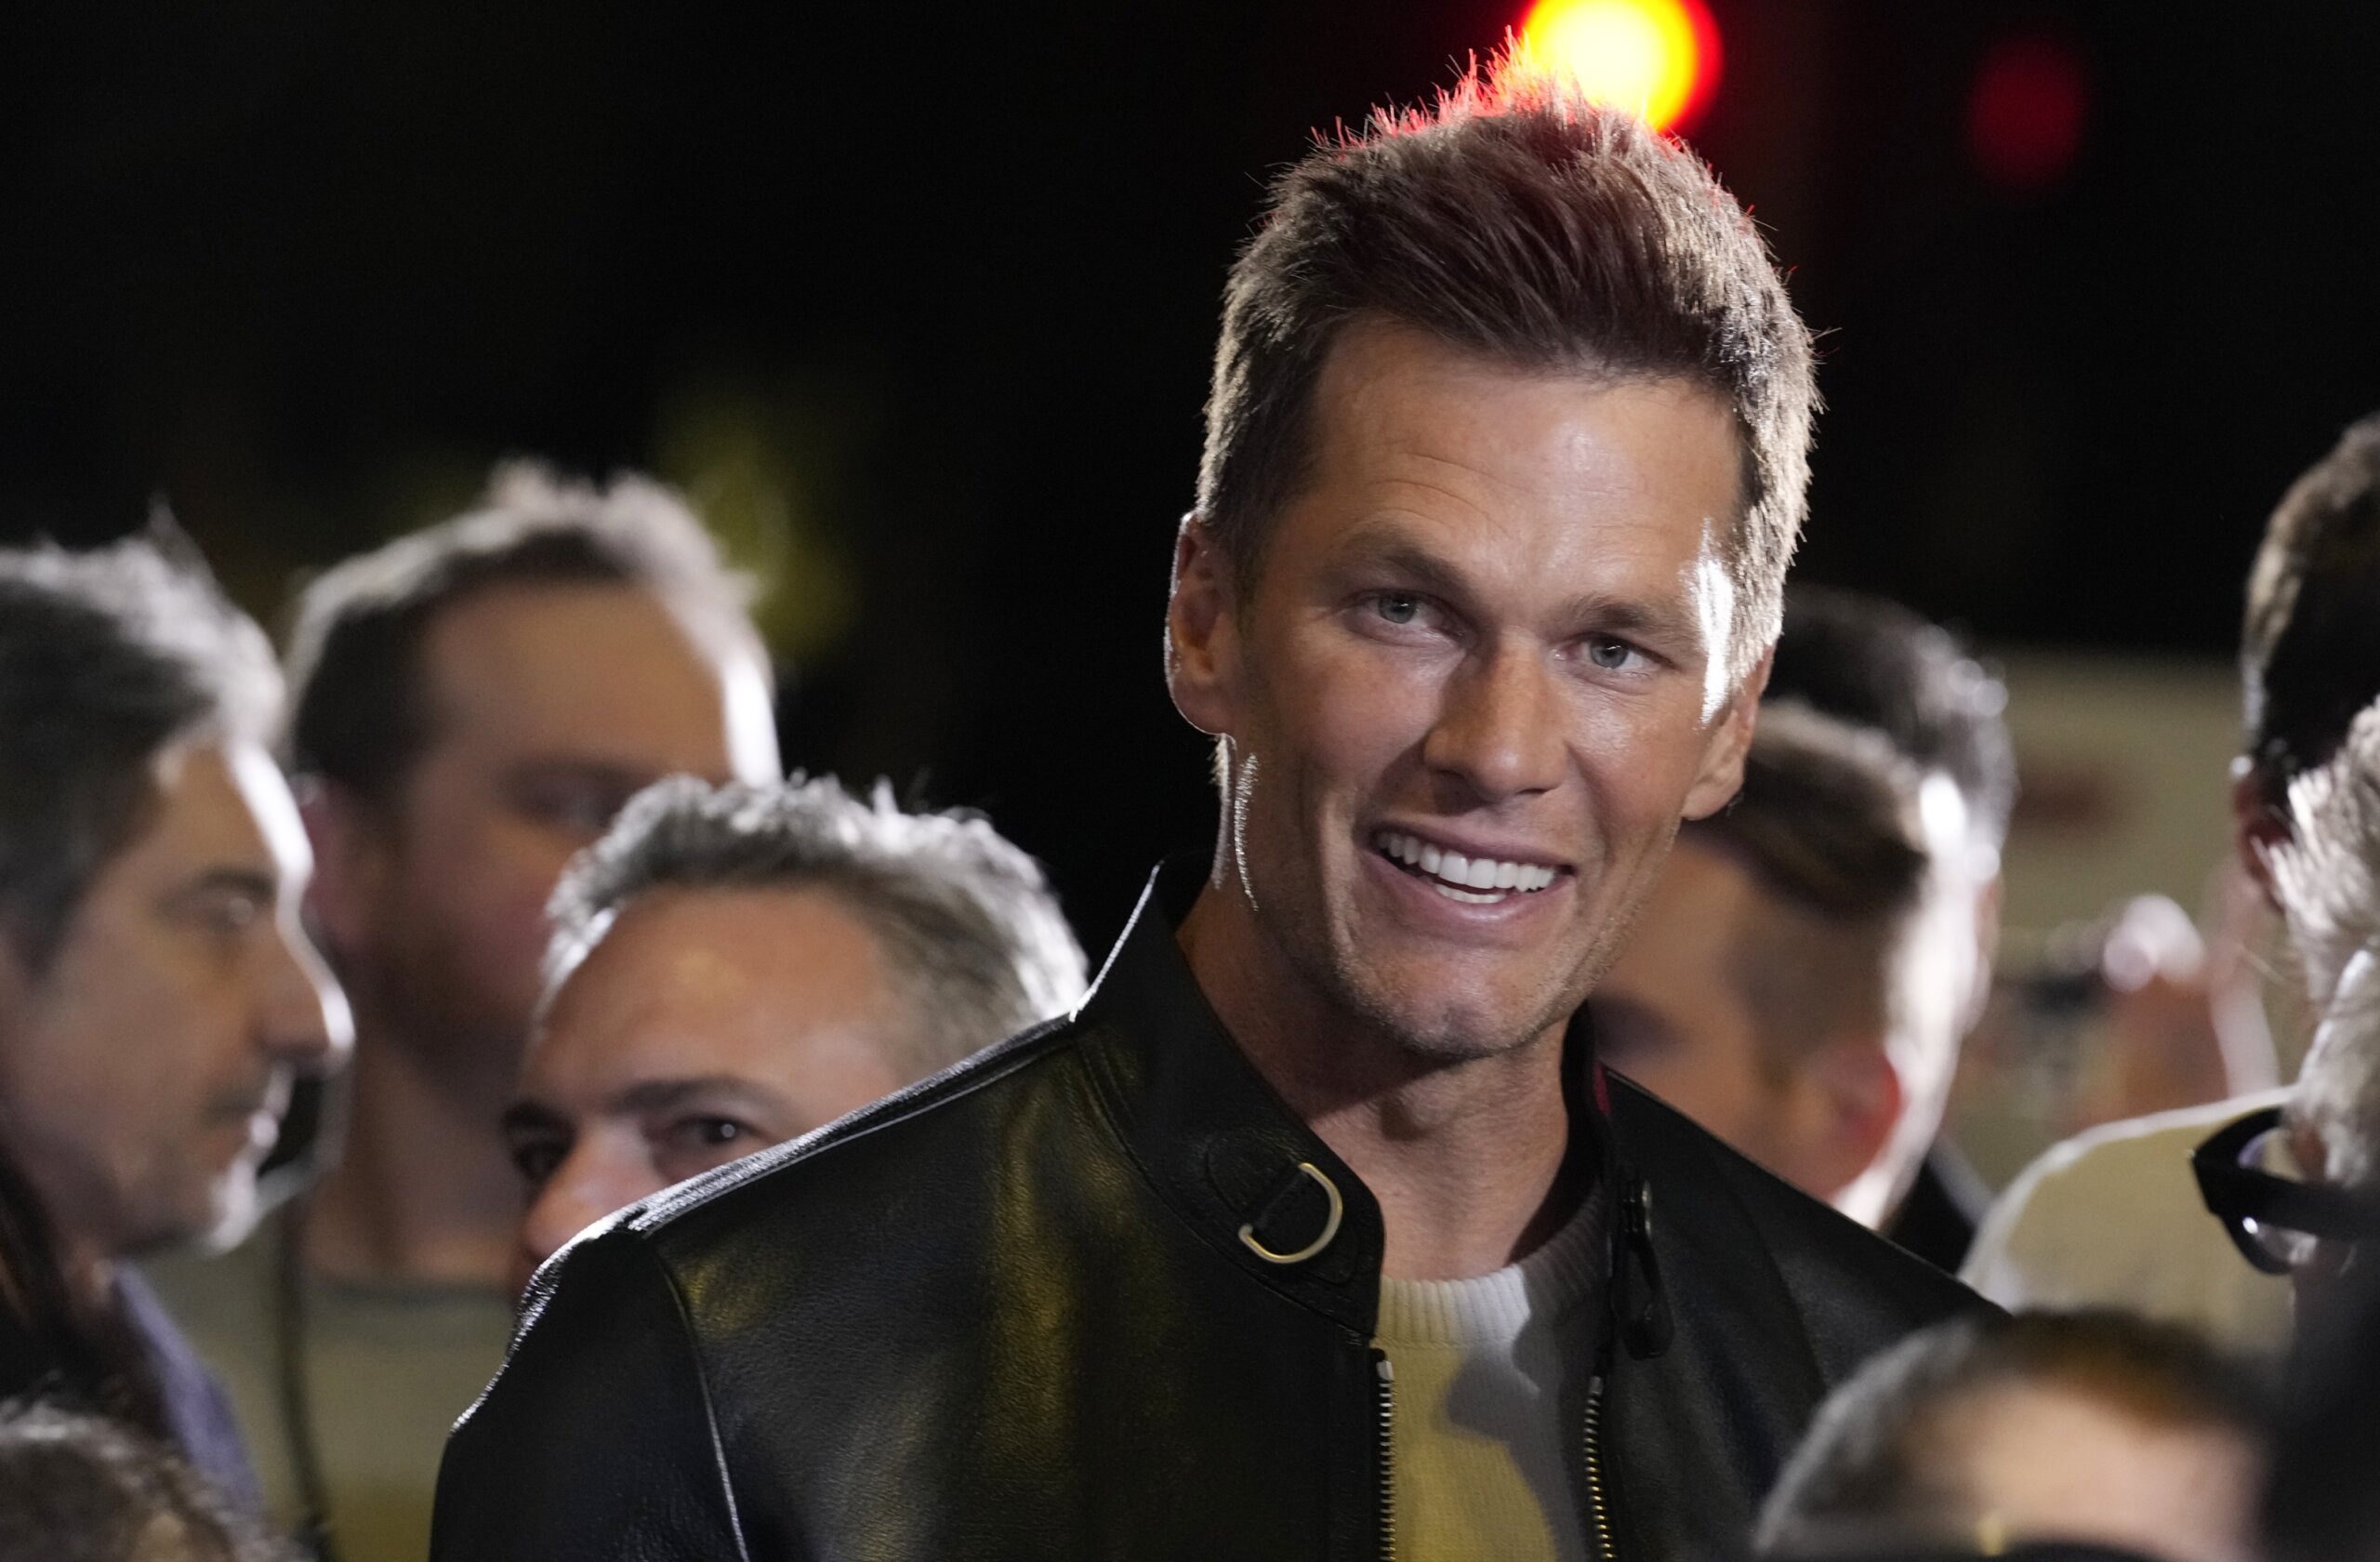 Tom Brady’s plate remains full after retirement announcement